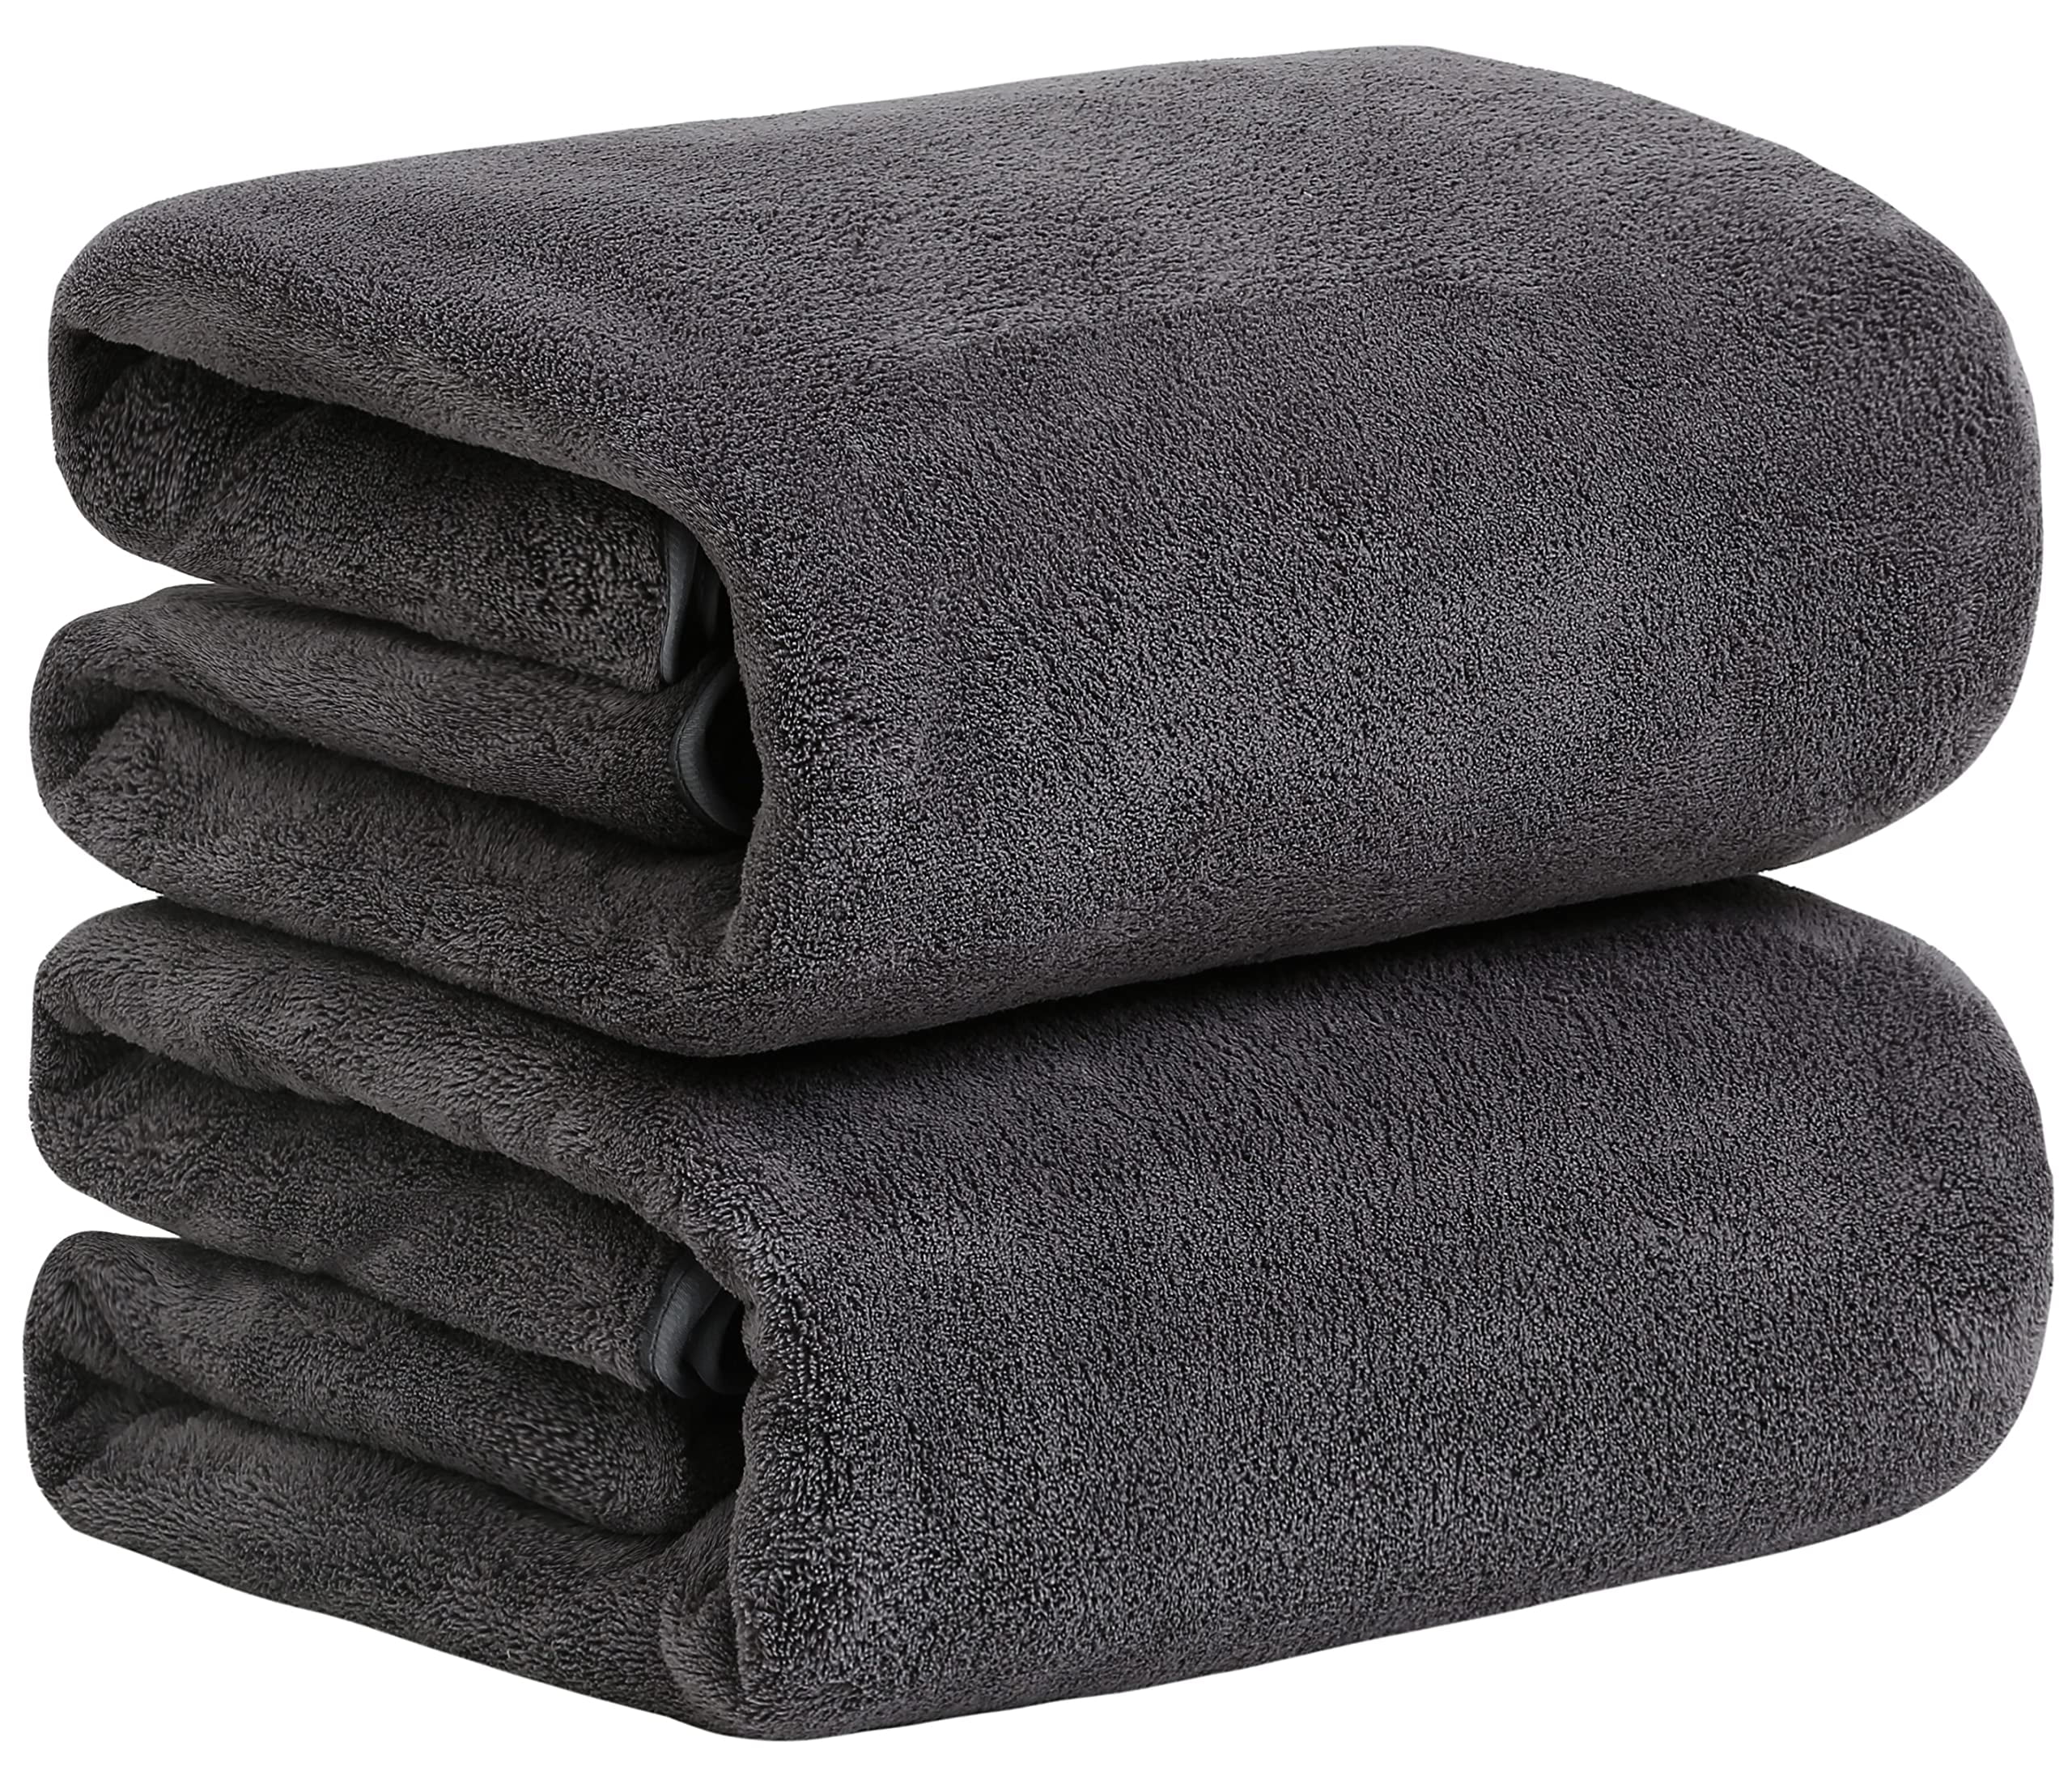  MAGGEA 4 Piece Oversized Bath Sheet Towels (35 x 70 in,Navy  Blue) 700 GSM Ultra Soft Bath Towel Set Thick Large Cozy Plush Highly  Absorbent Towels Quick Dry Bathroom Towels Hotel